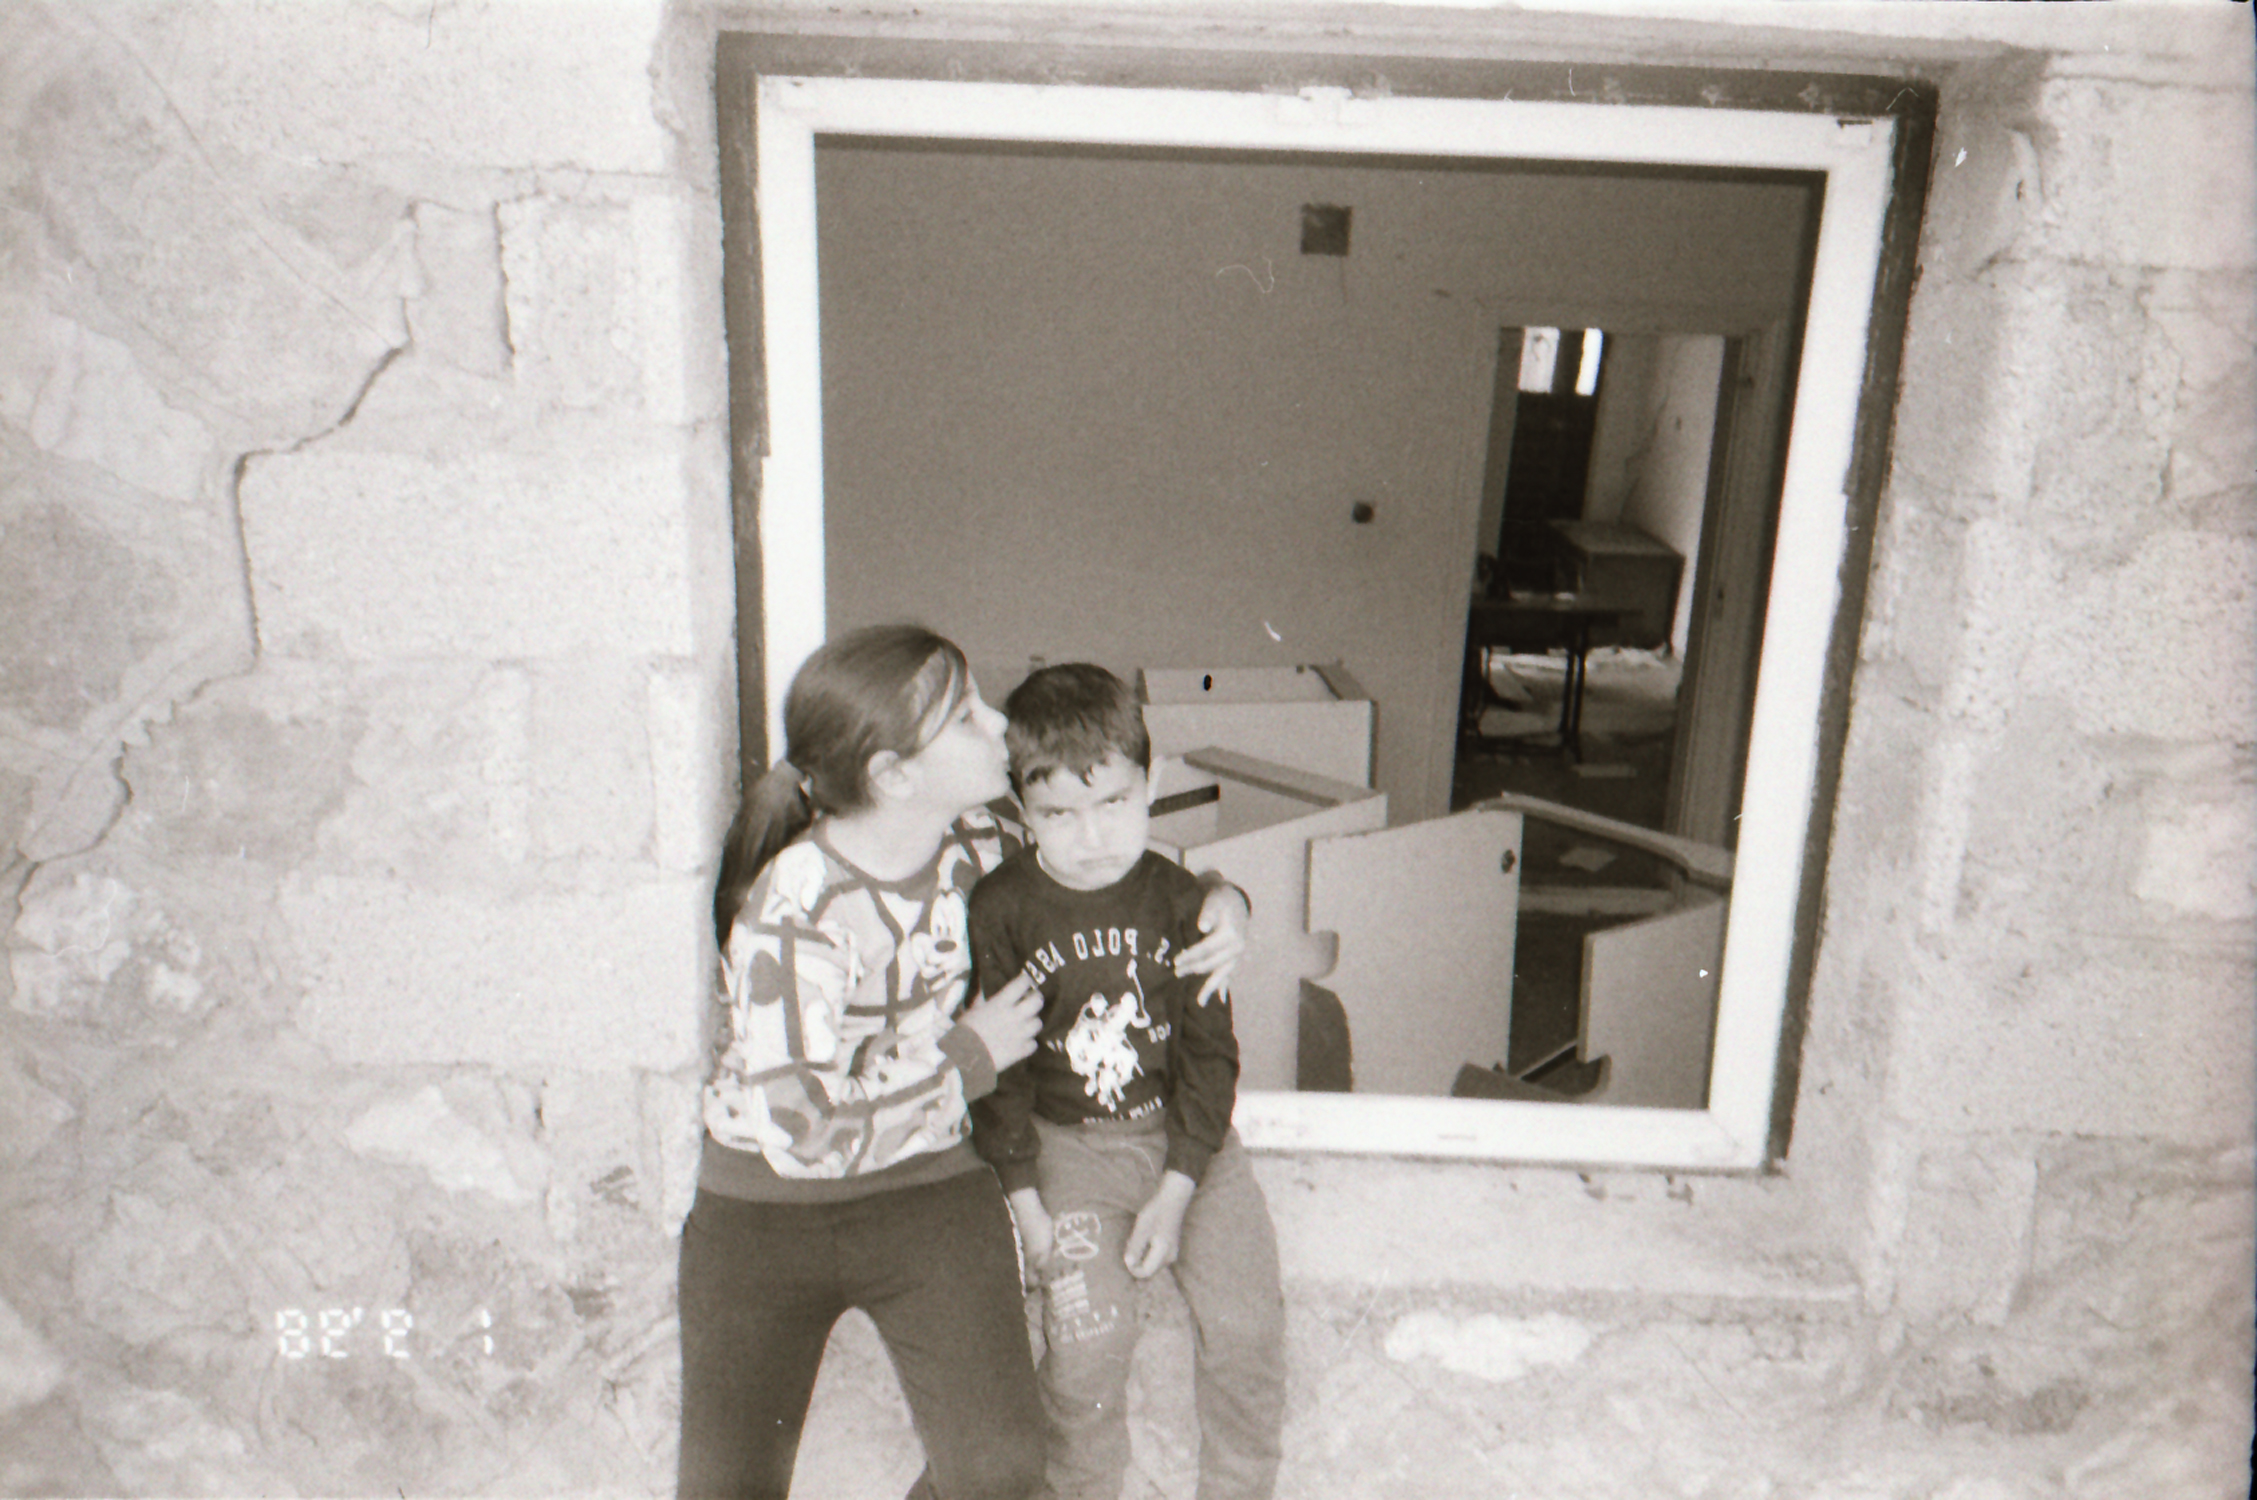 Girl kissing boy in front of window (Pic courtesy Sirkhane Darkroom)